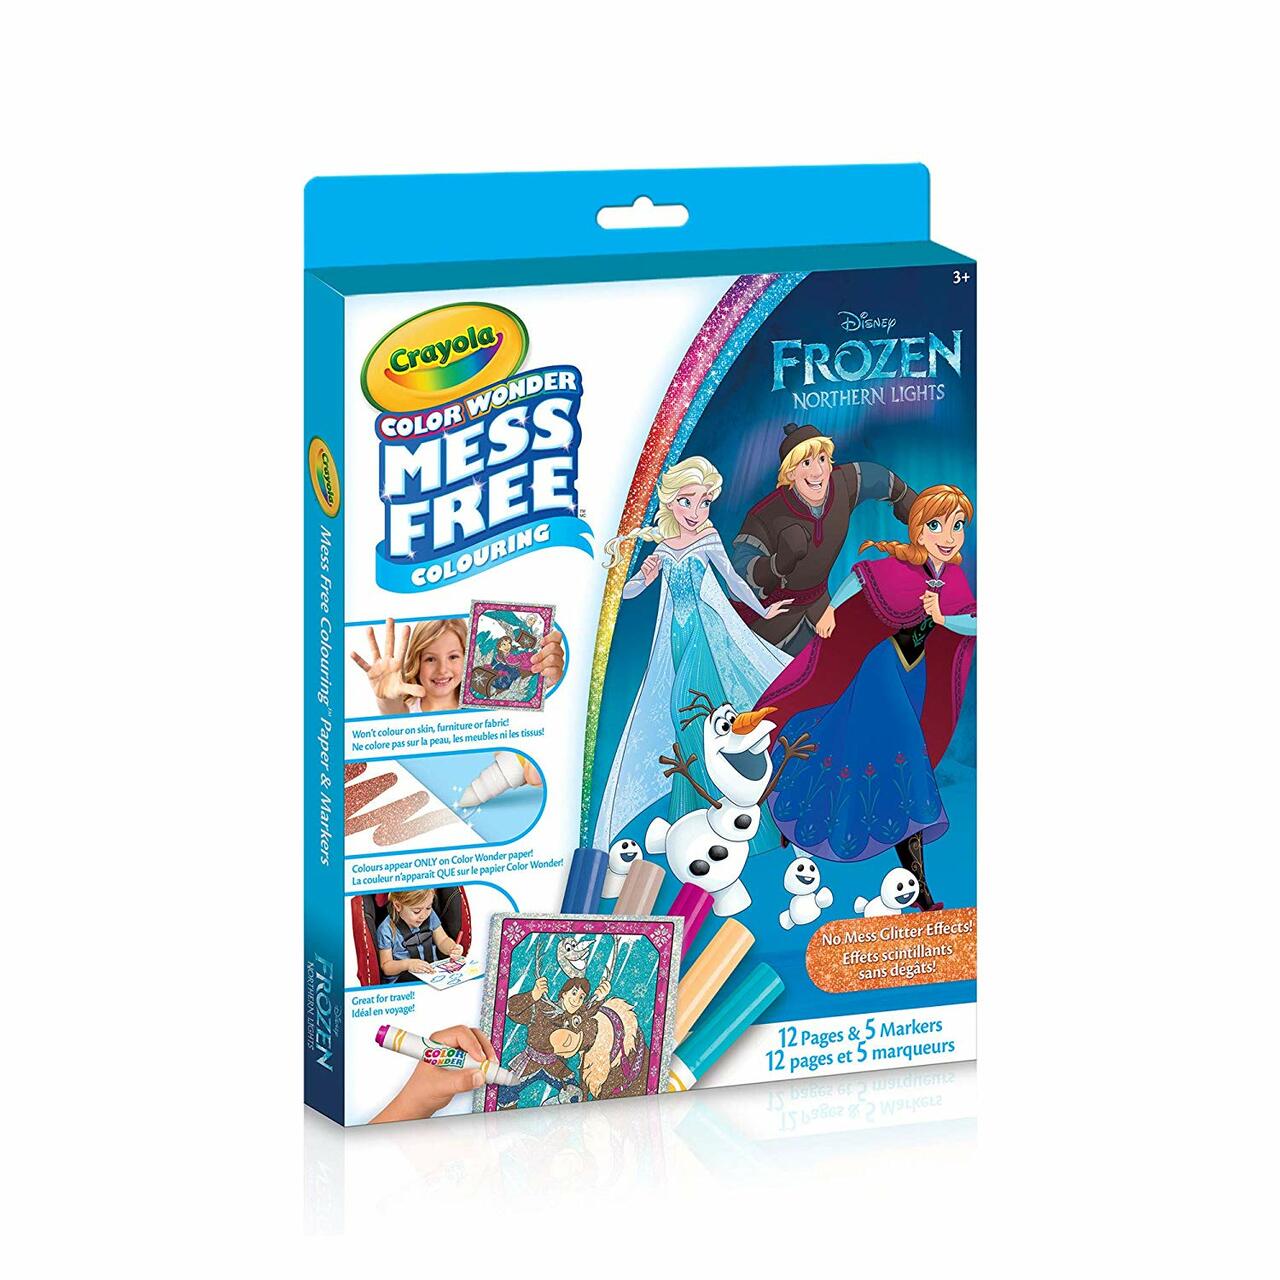 Crayola Color Wonder Glitter Kit Frozen Markers and Coloring Pages